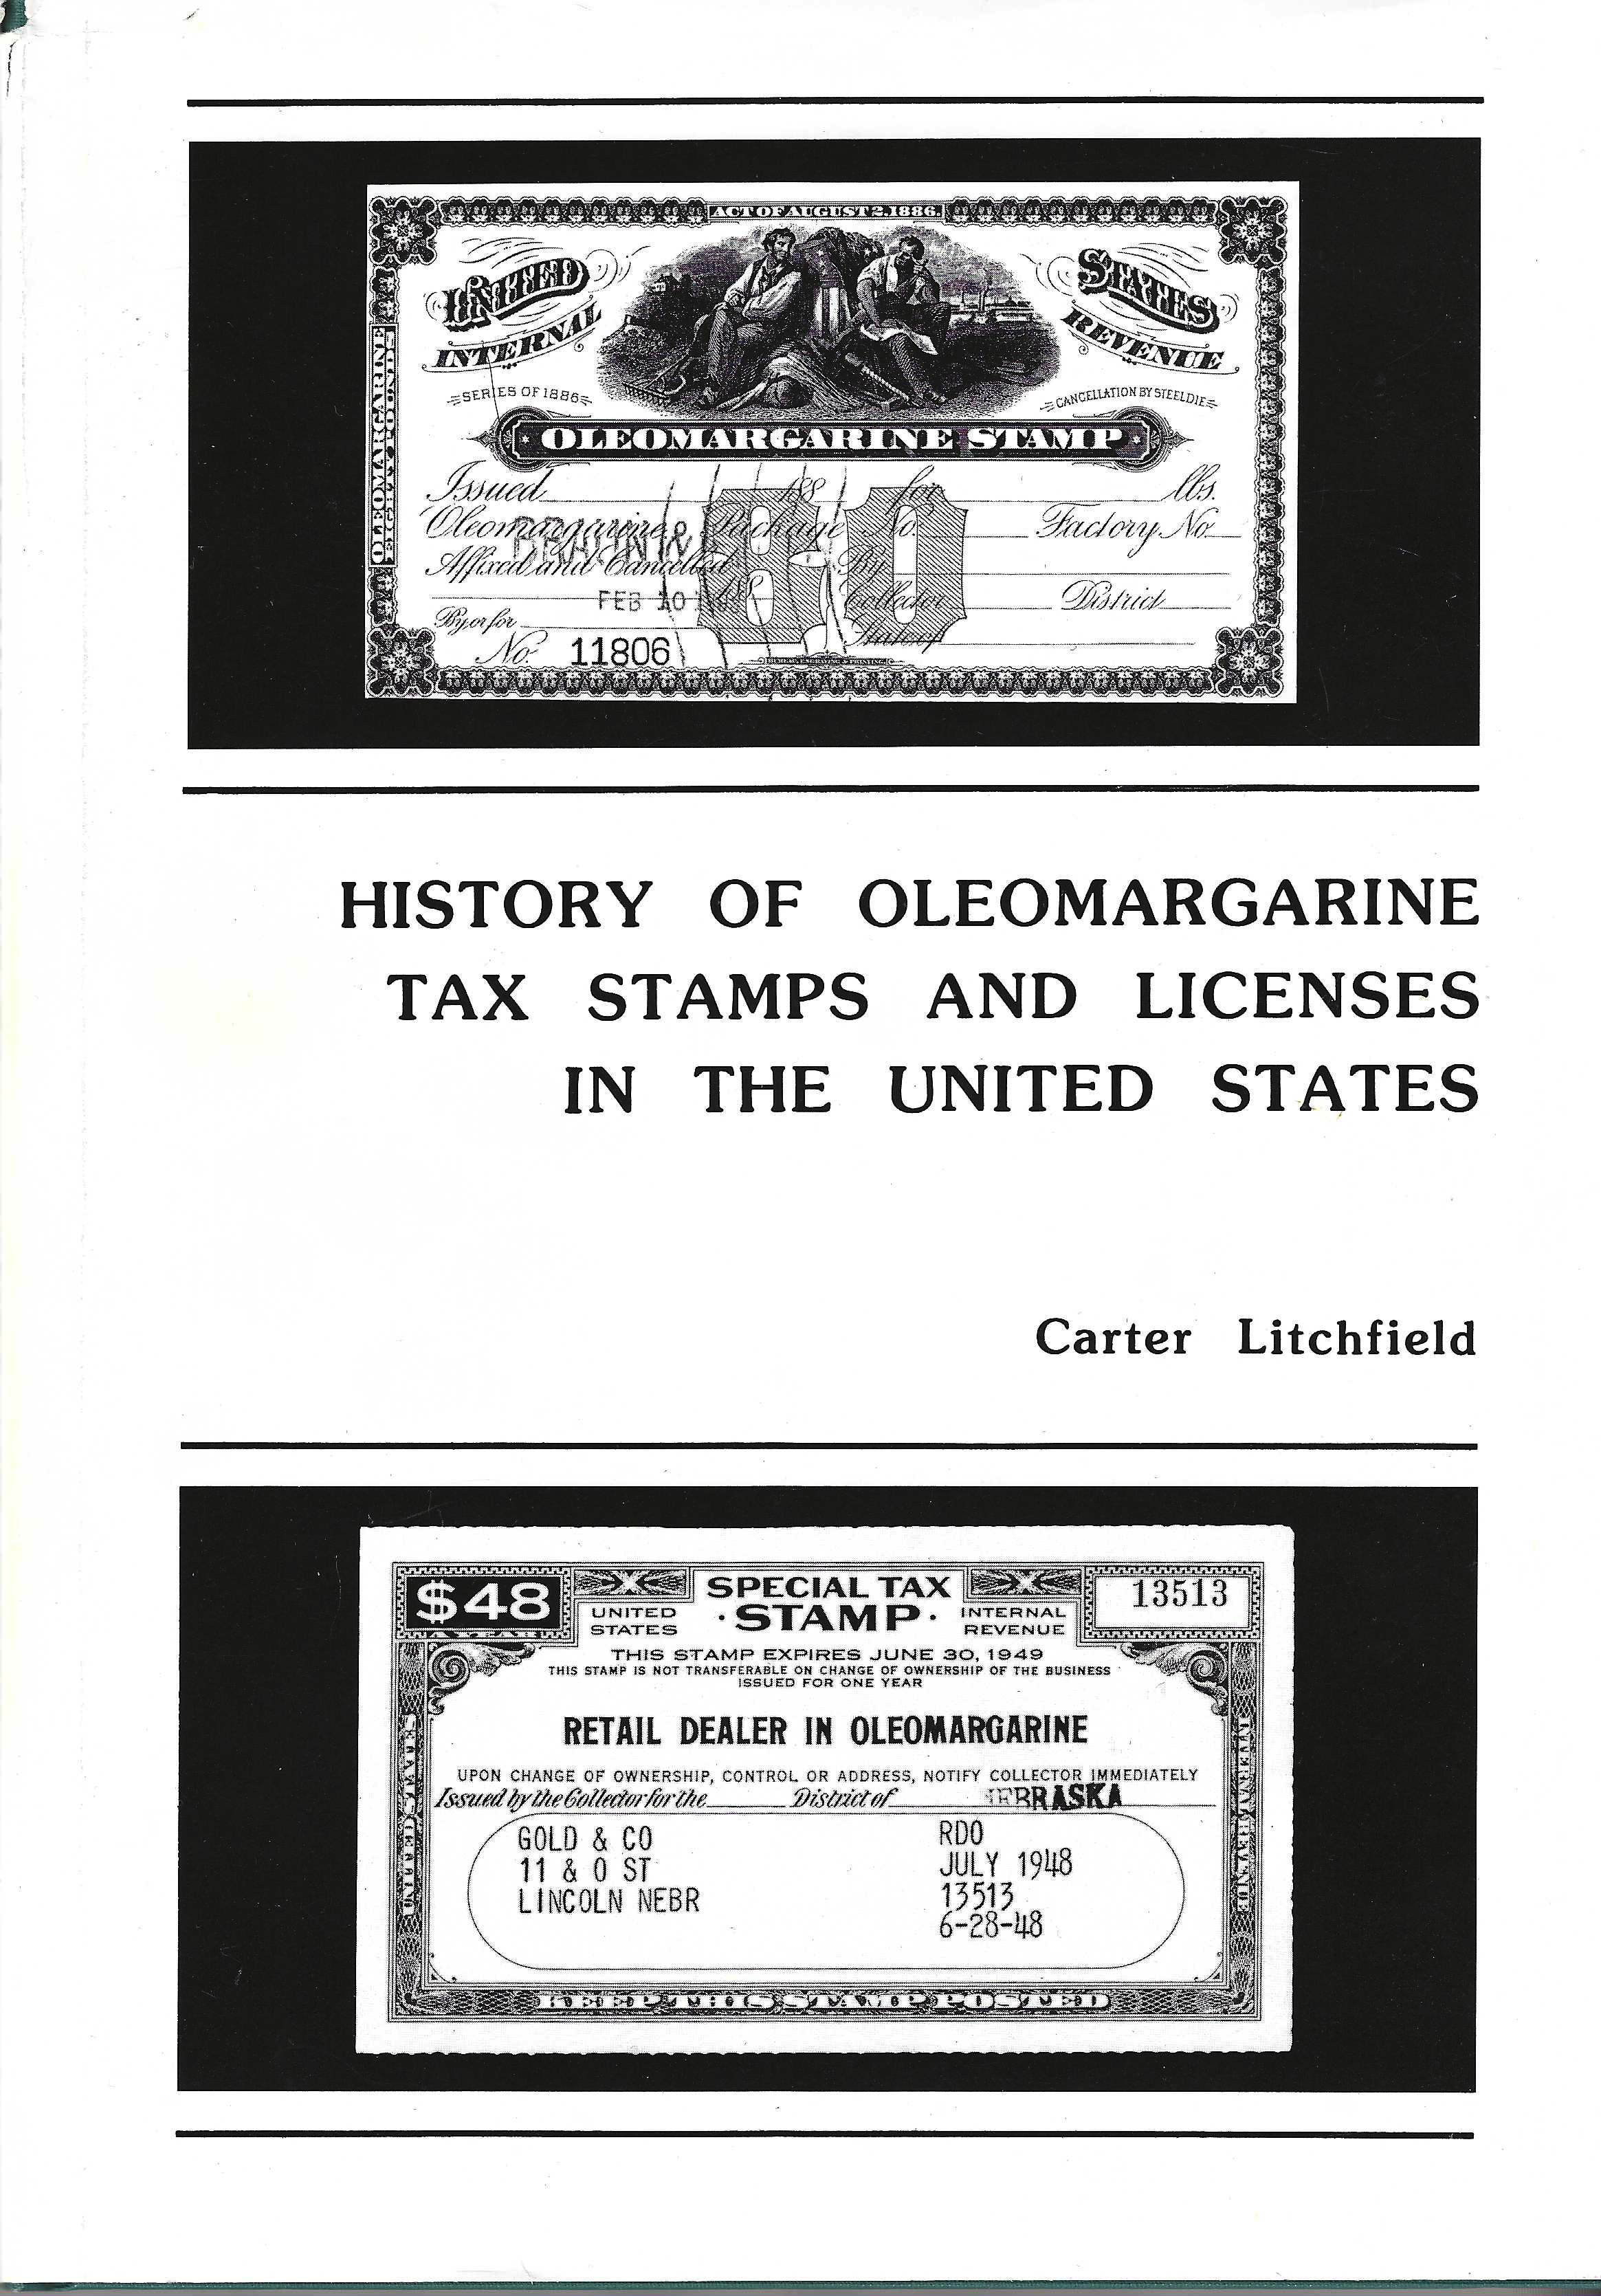 CATALOG - History Of Oleomargarine Tax Stamps And License In The United States, 1988 by Carter Litchfield, like new w/ book cover